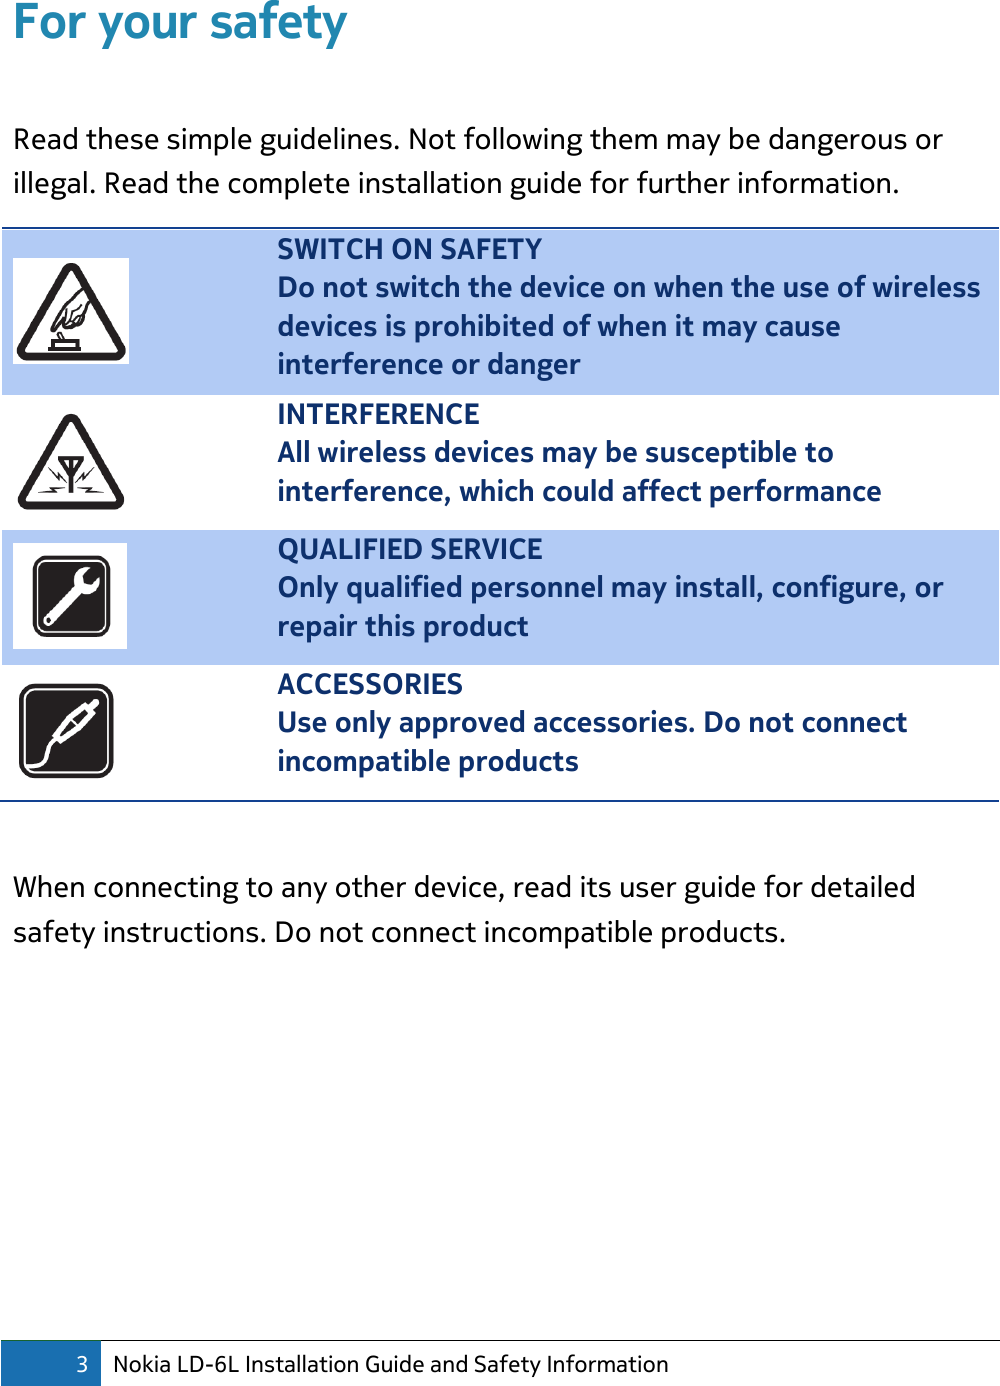 3 Nokia LD-6L Installation Guide and Safety Information  For your safety  Read these simple guidelines. Not following them may be dangerous or illegal. Read the complete installation guide for further information.  SWITCH ON SAFETY Do not switch the device on when the use of wireless devices is prohibited of when it may cause interference or danger  INTERFERENCE All wireless devices may be susceptible to interference, which could affect performance  QUALIFIED SERVICE Only qualified personnel may install, configure, or repair this product  ACCESSORIES Use only approved accessories. Do not connect incompatible products  When connecting to any other device, read its user guide for detailed safety instructions. Do not connect incompatible products.      